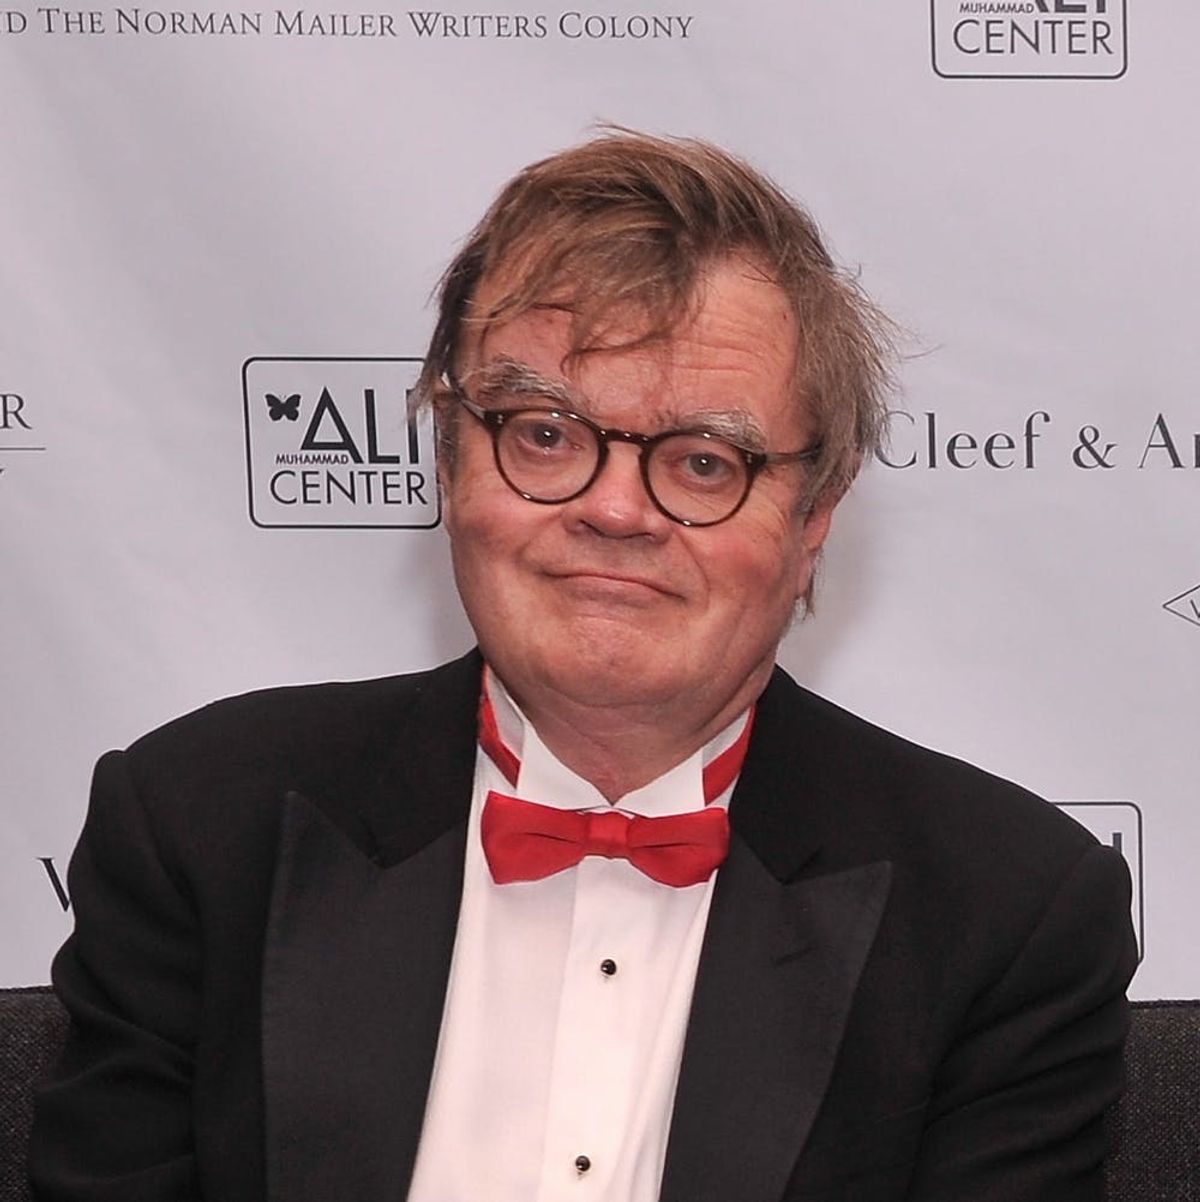 Public Radio Host and Creator of ‘A Prairie Home Companion’ Garrison Keillor Fired Following Misconduct Allegations